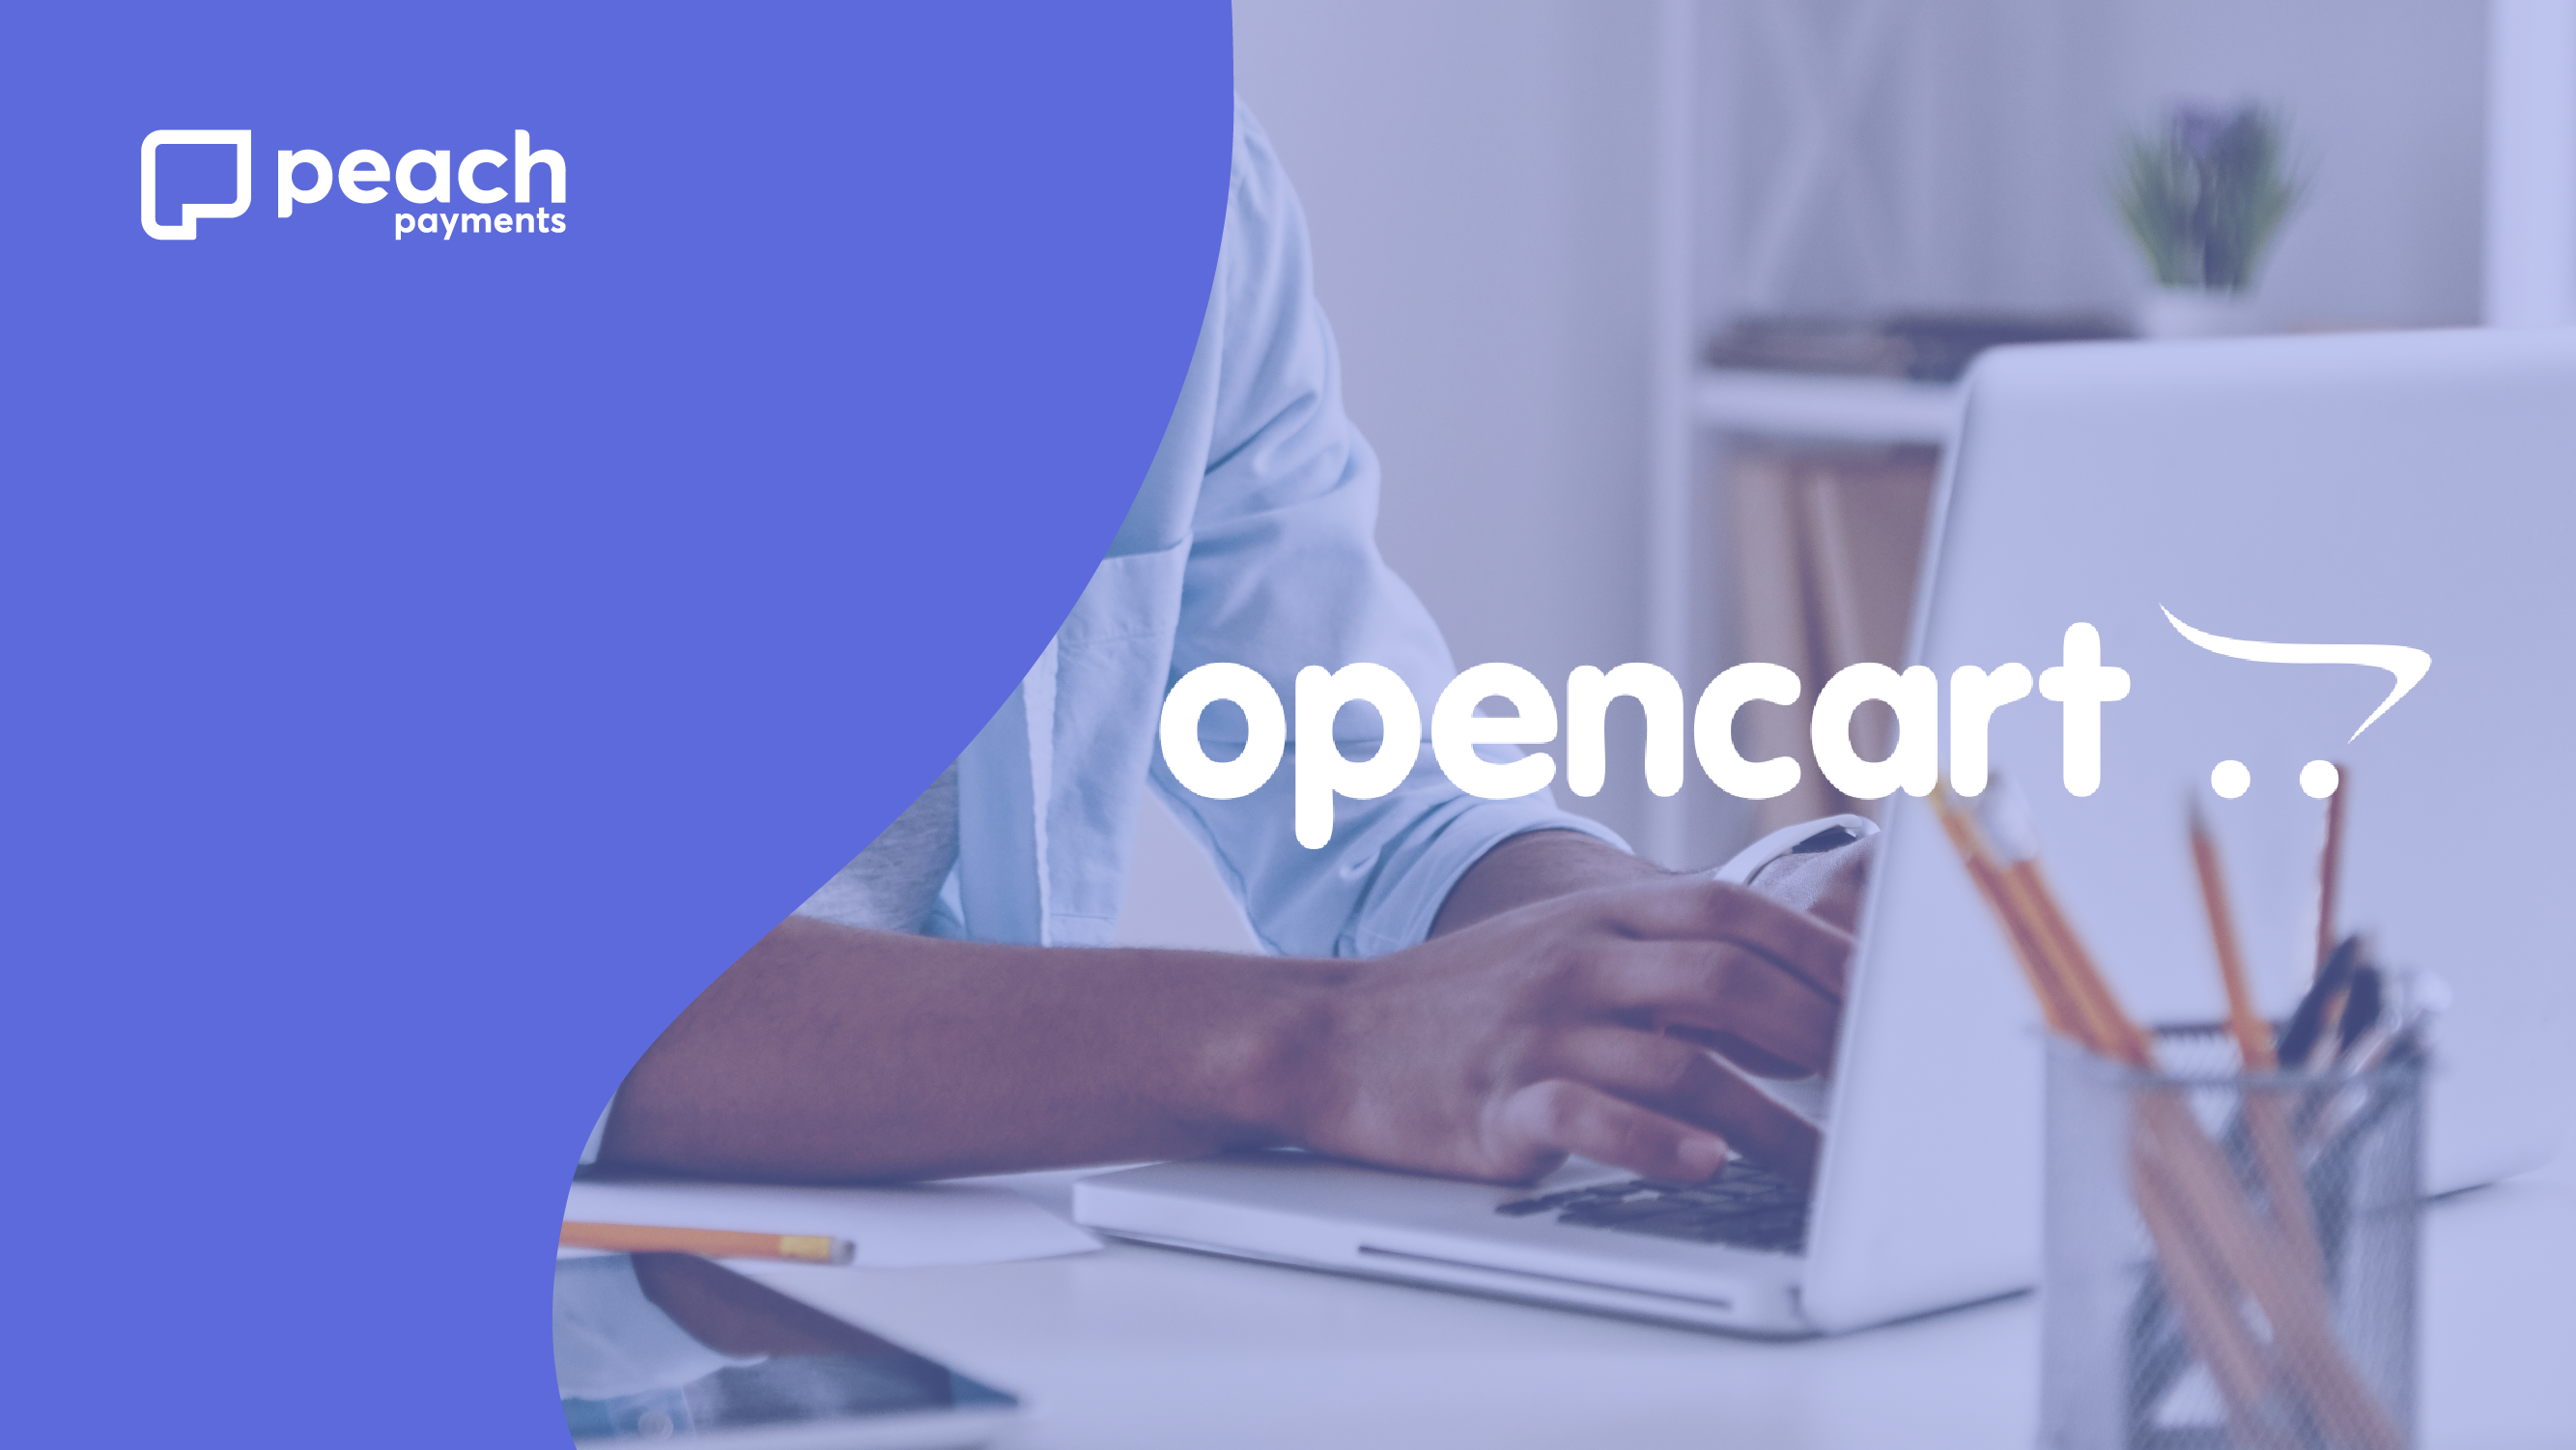 Ecommerce made easy with OpenCart and Peach Payments